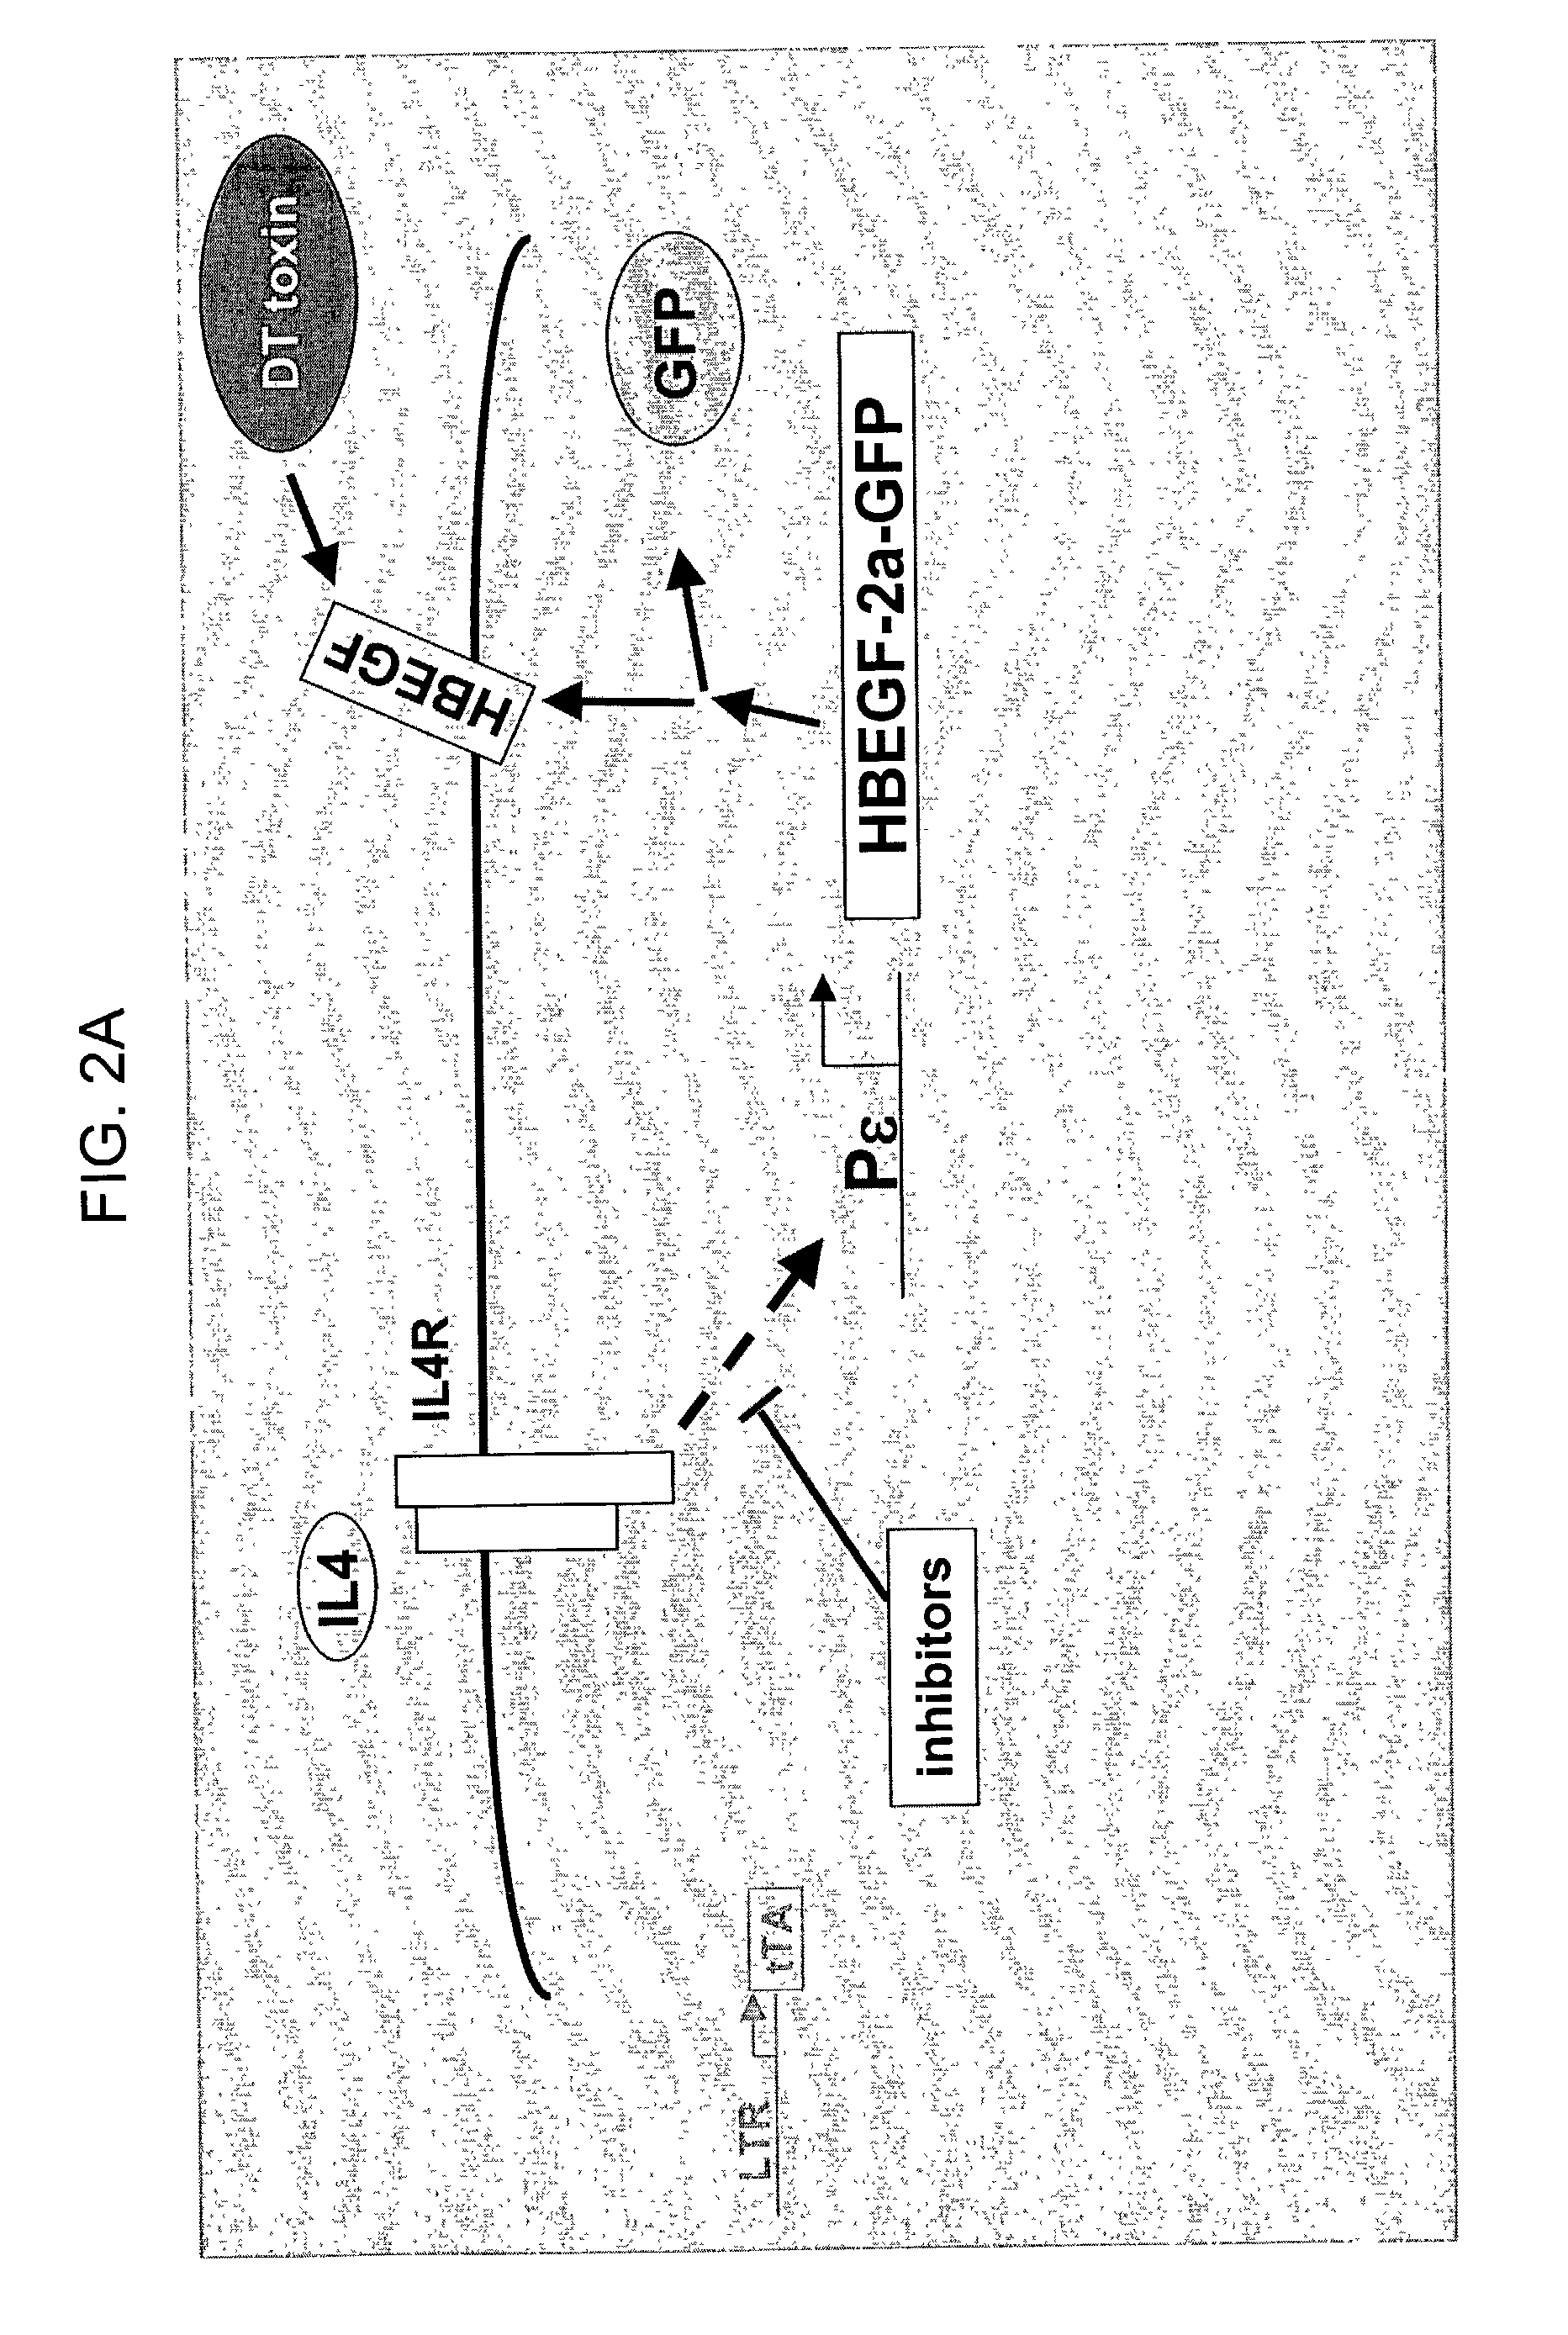 Compounds that modulate processes associated with IgE production and methods and kits for identifying and using the same